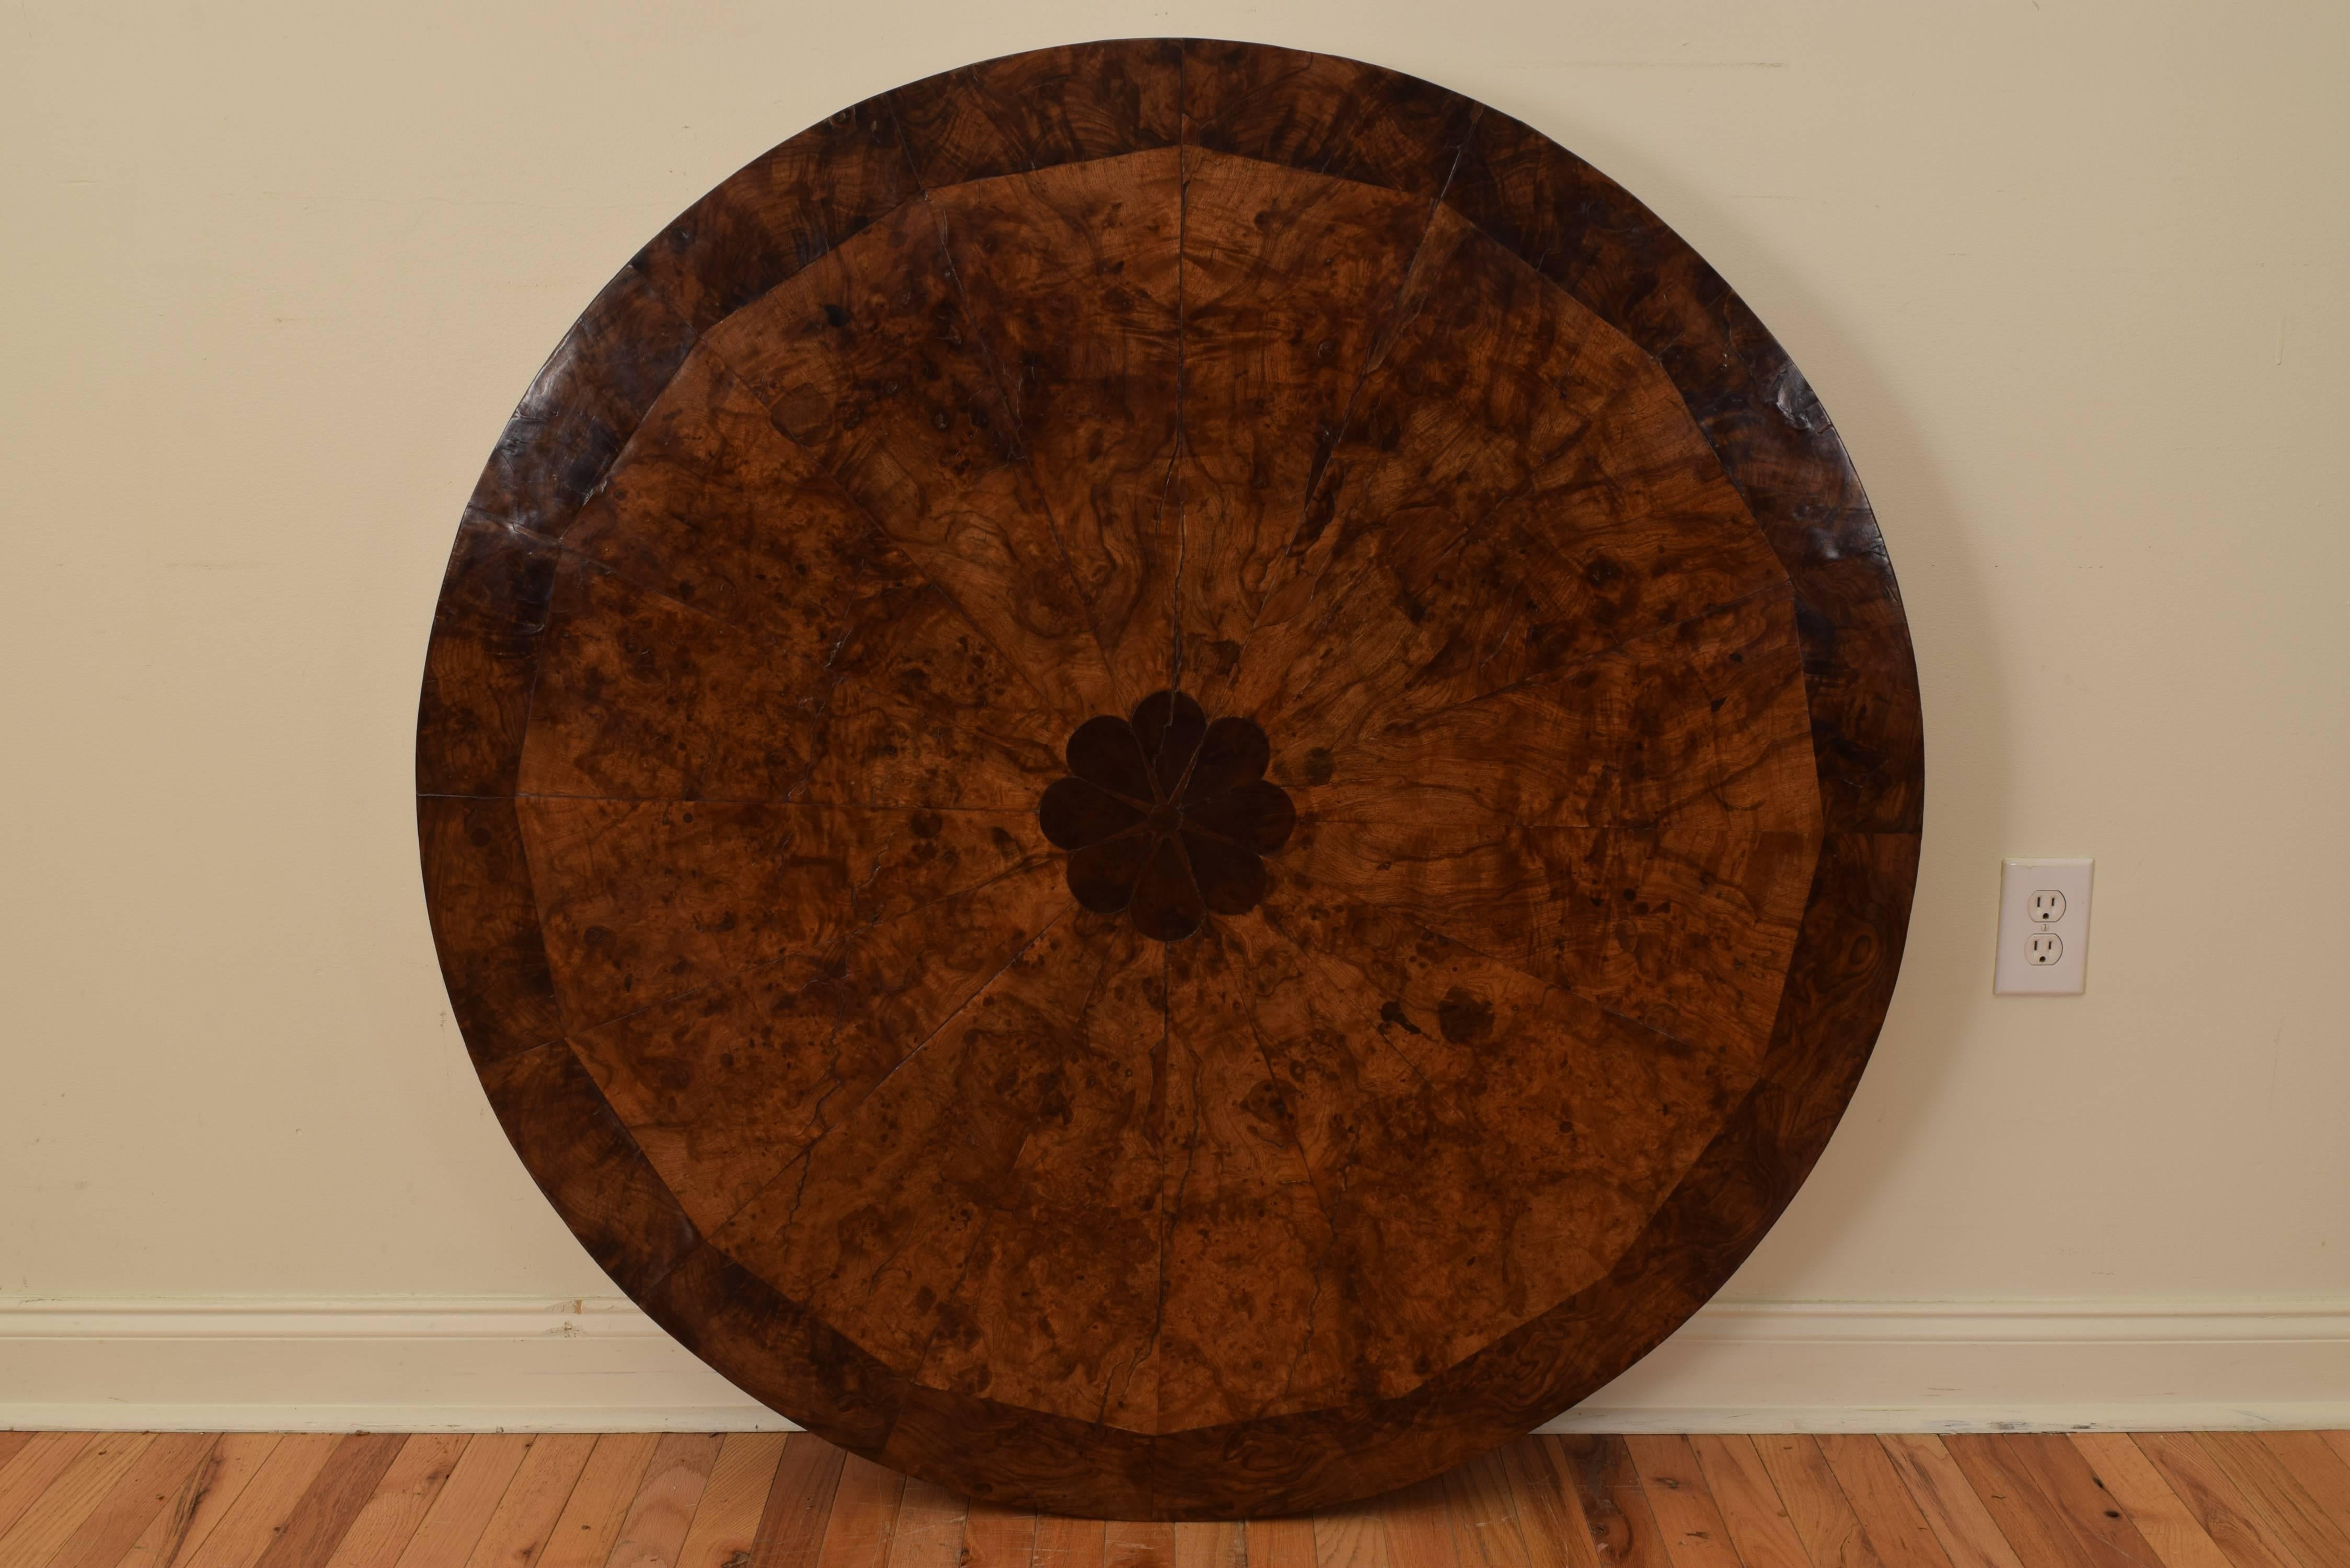 Likely from Rome in the Lazio region of Italy, having a circular top covered in walnut veneer in triangular wedges radiating from a centered darker fruitwood floral medallion, a veneer of similar color completing the outer edge of the top, the outer